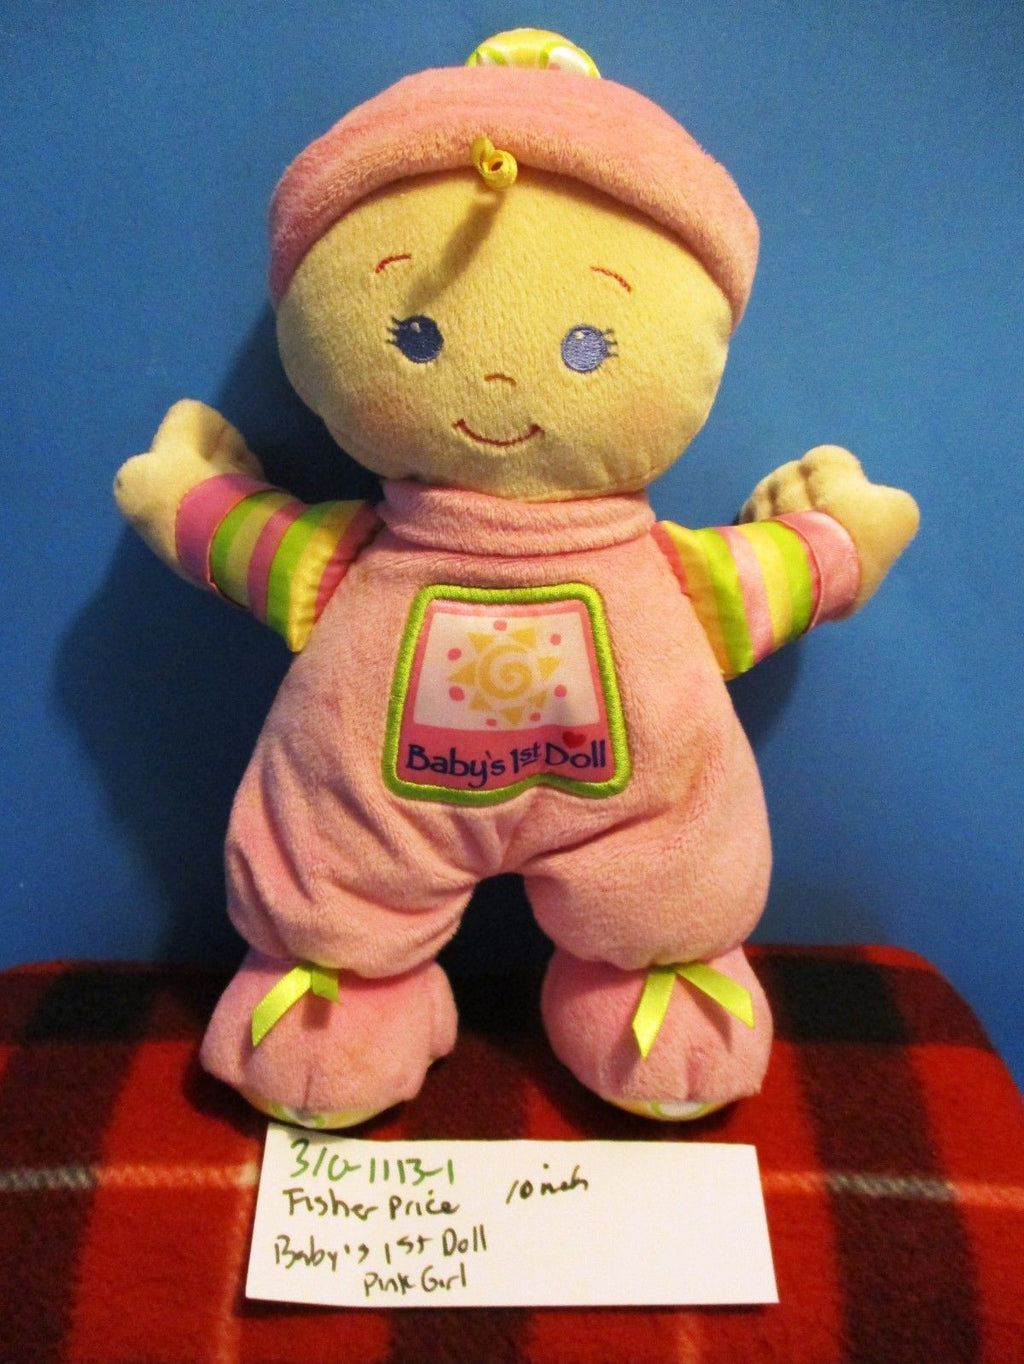 Fisher Price Pink Baby's 1st Doll Girl Rattle Stuffed Plush Toy Blond Curl 2008" 